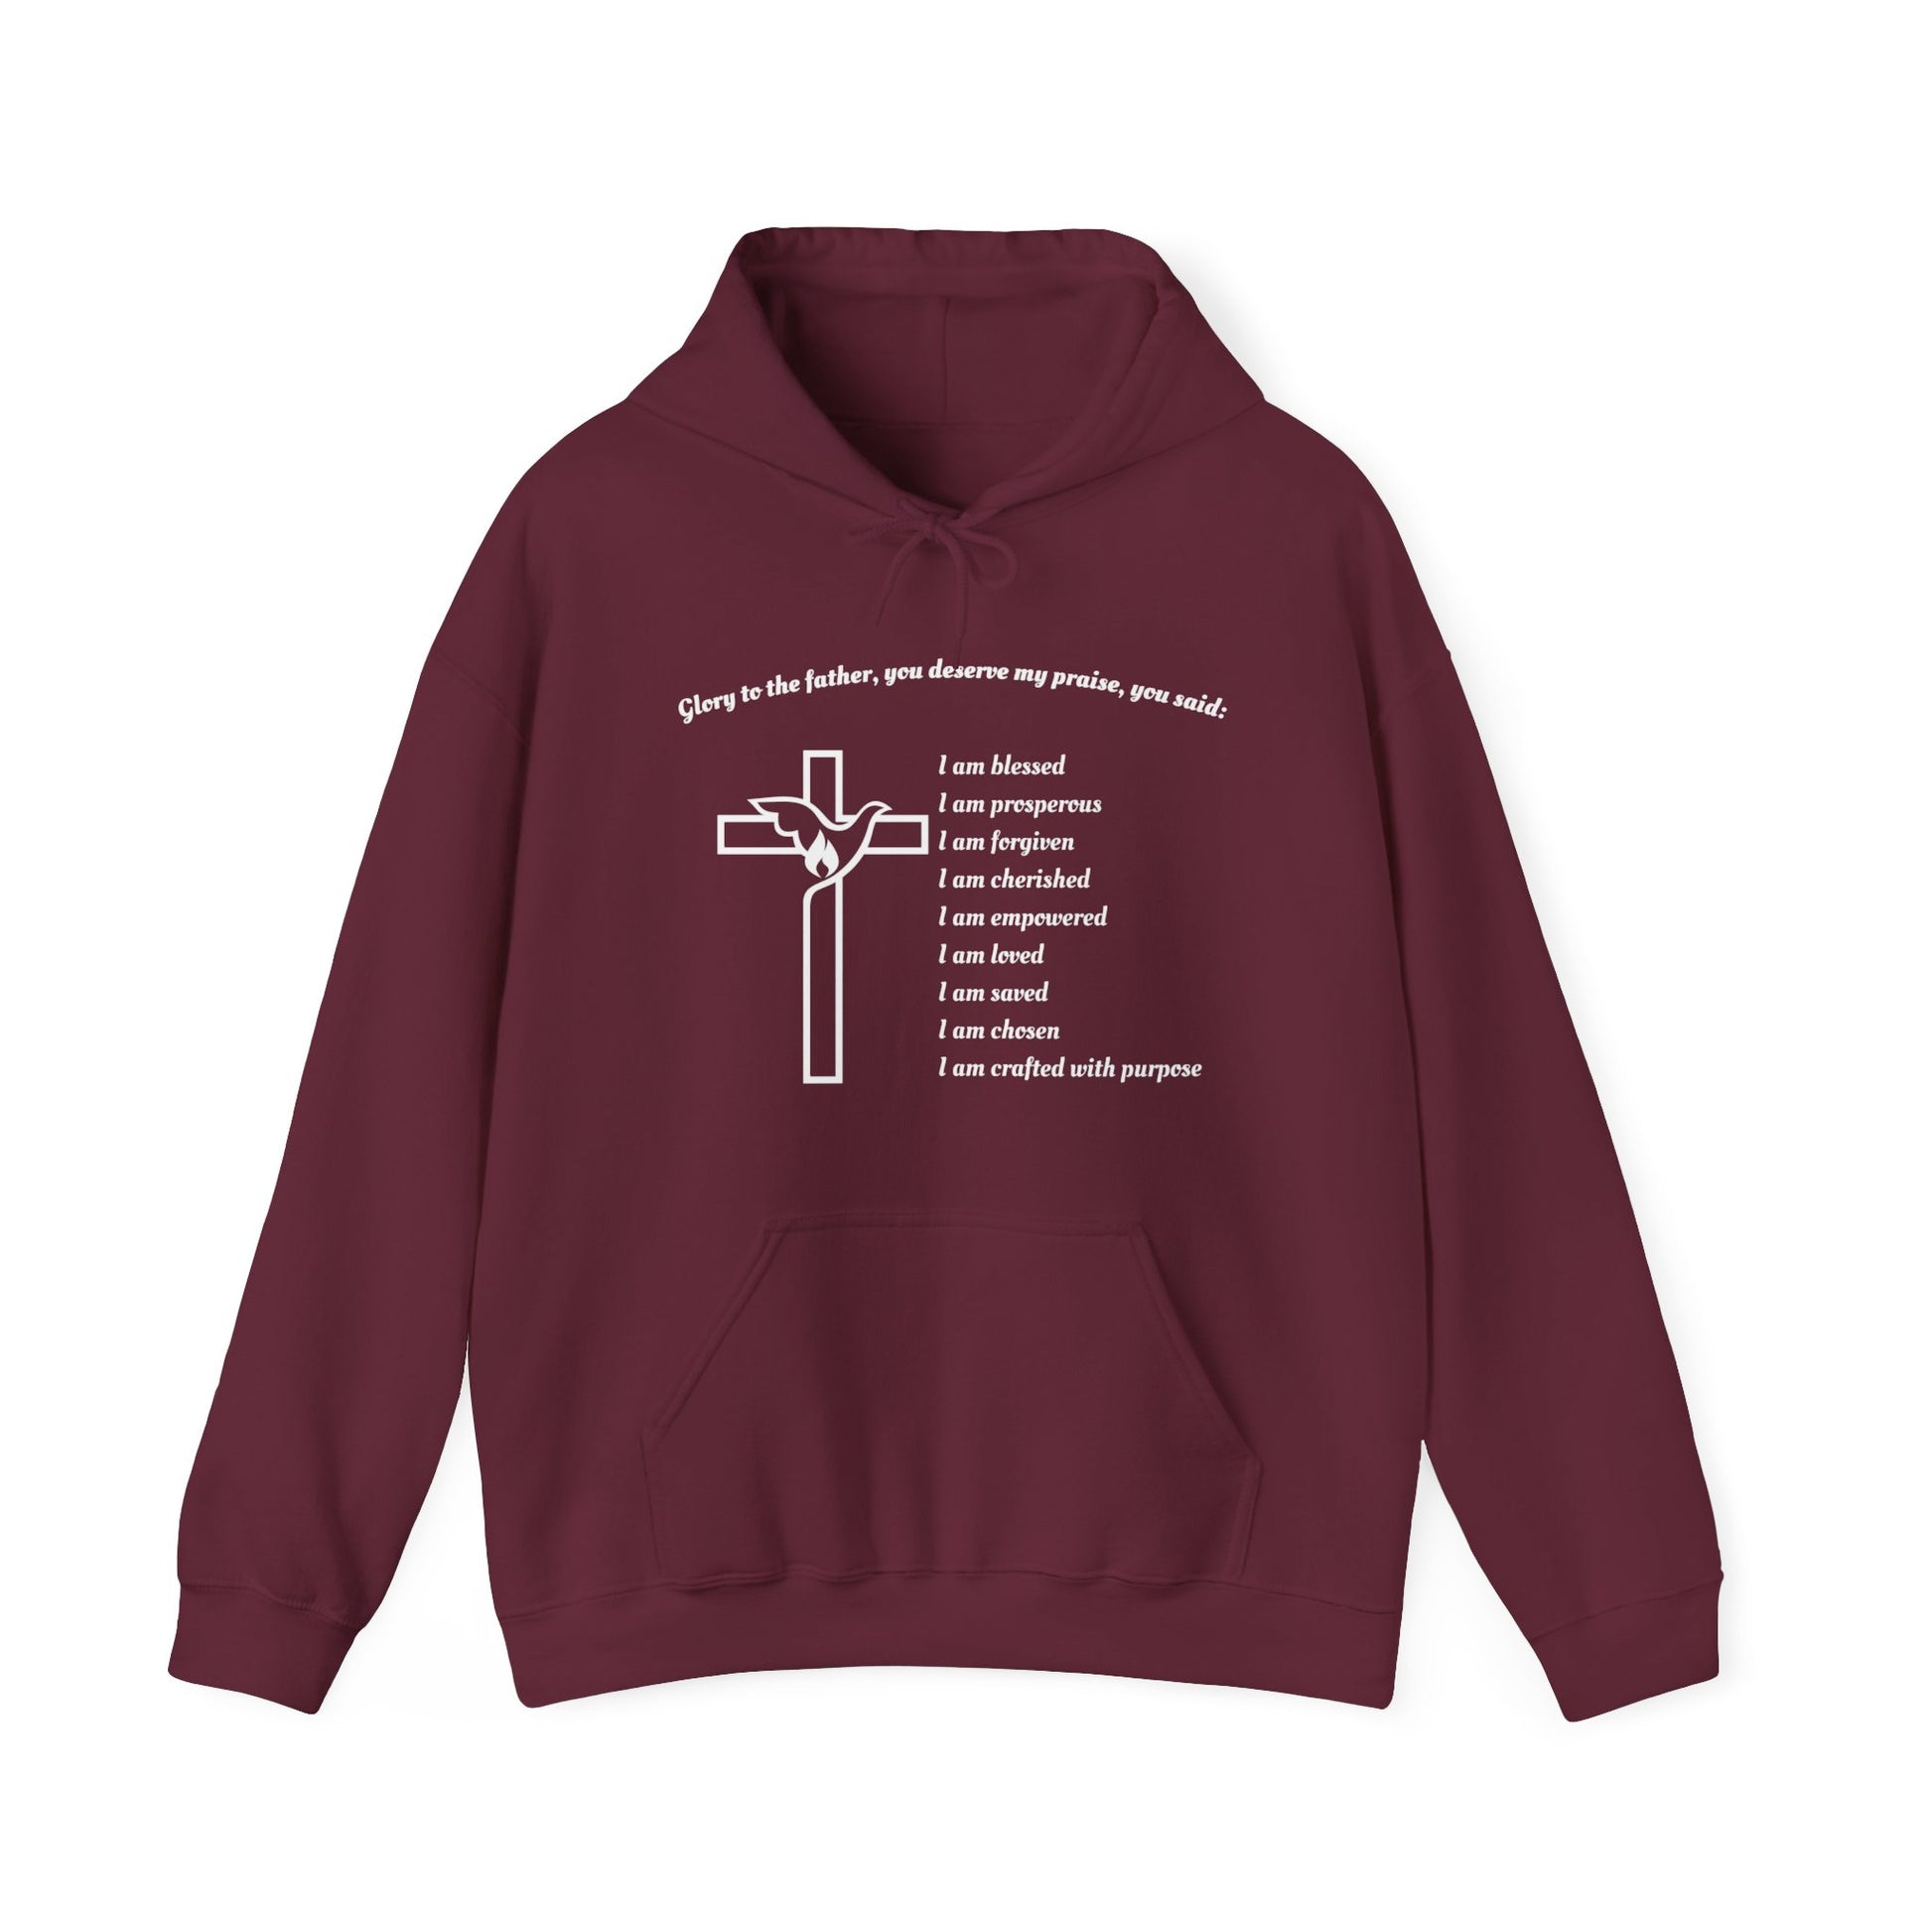 I am Glory to the Father Hooded Sweatshirt Unisex Cozy Heavy Blend50